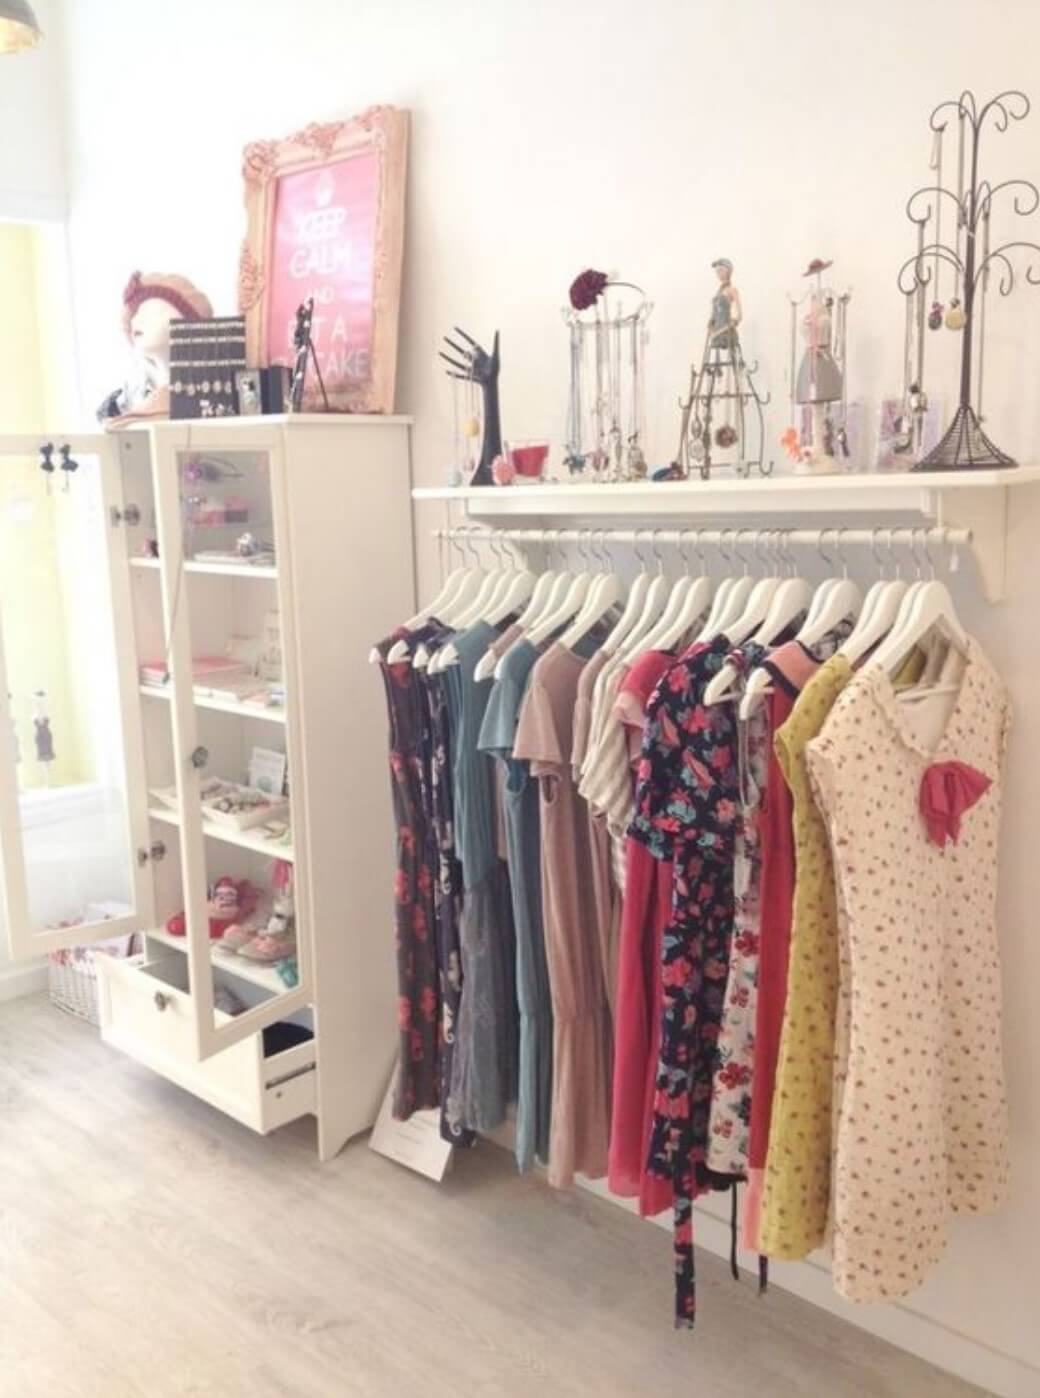 Wardrobe made with a wooden shelf and a low tube fixing to the wall with hanging dresses.